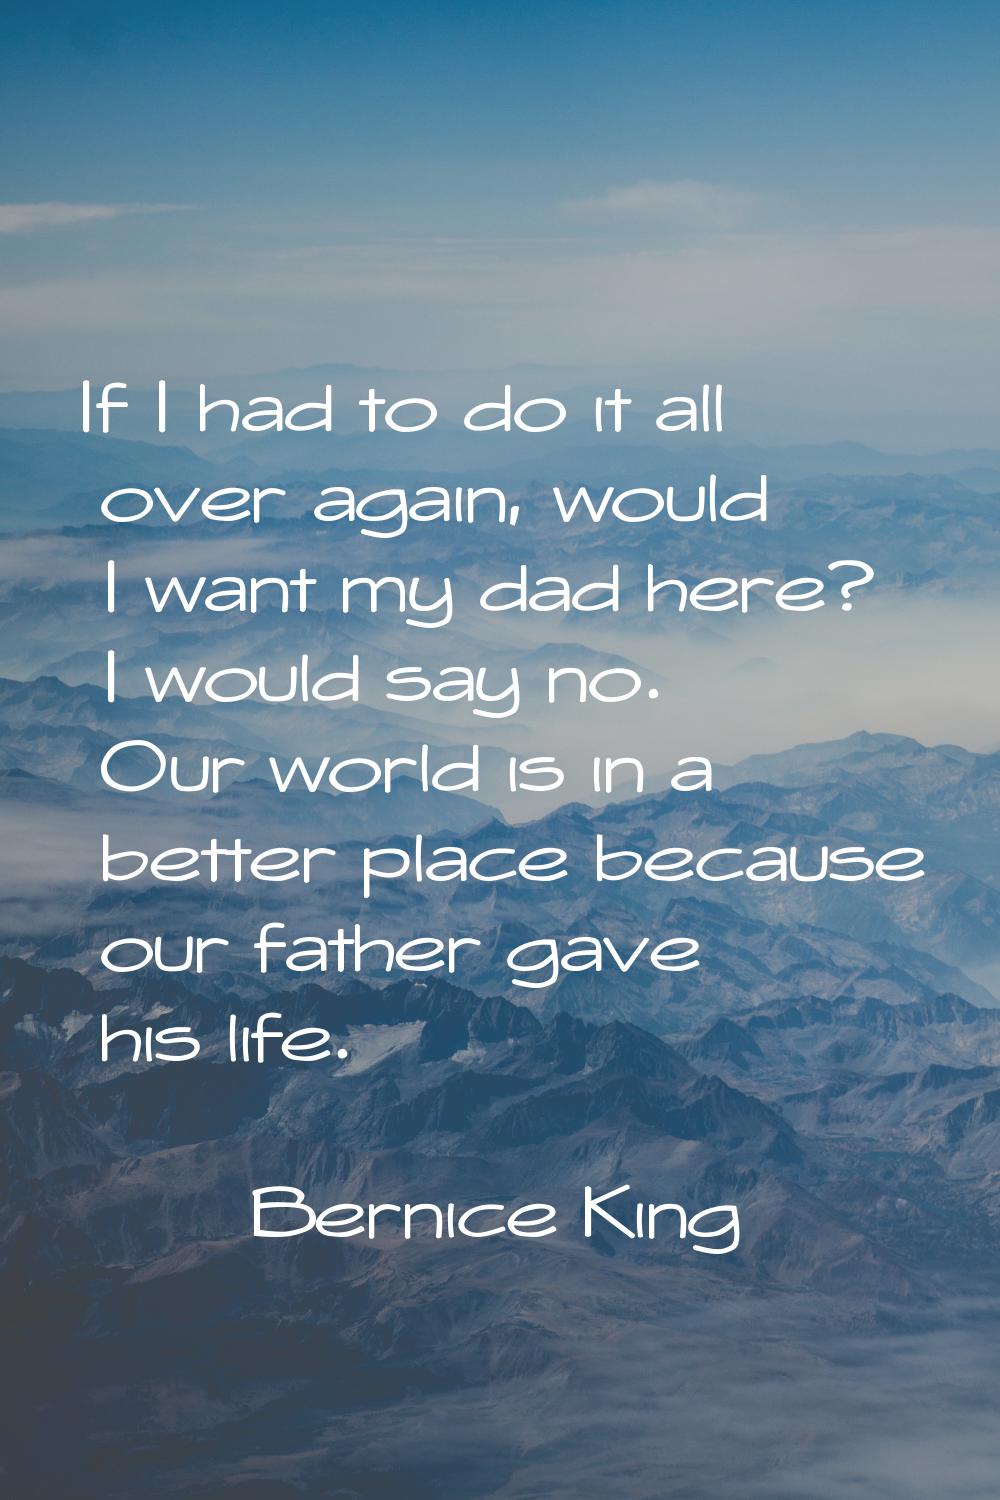 If I had to do it all over again, would I want my dad here? I would say no. Our world is in a bette